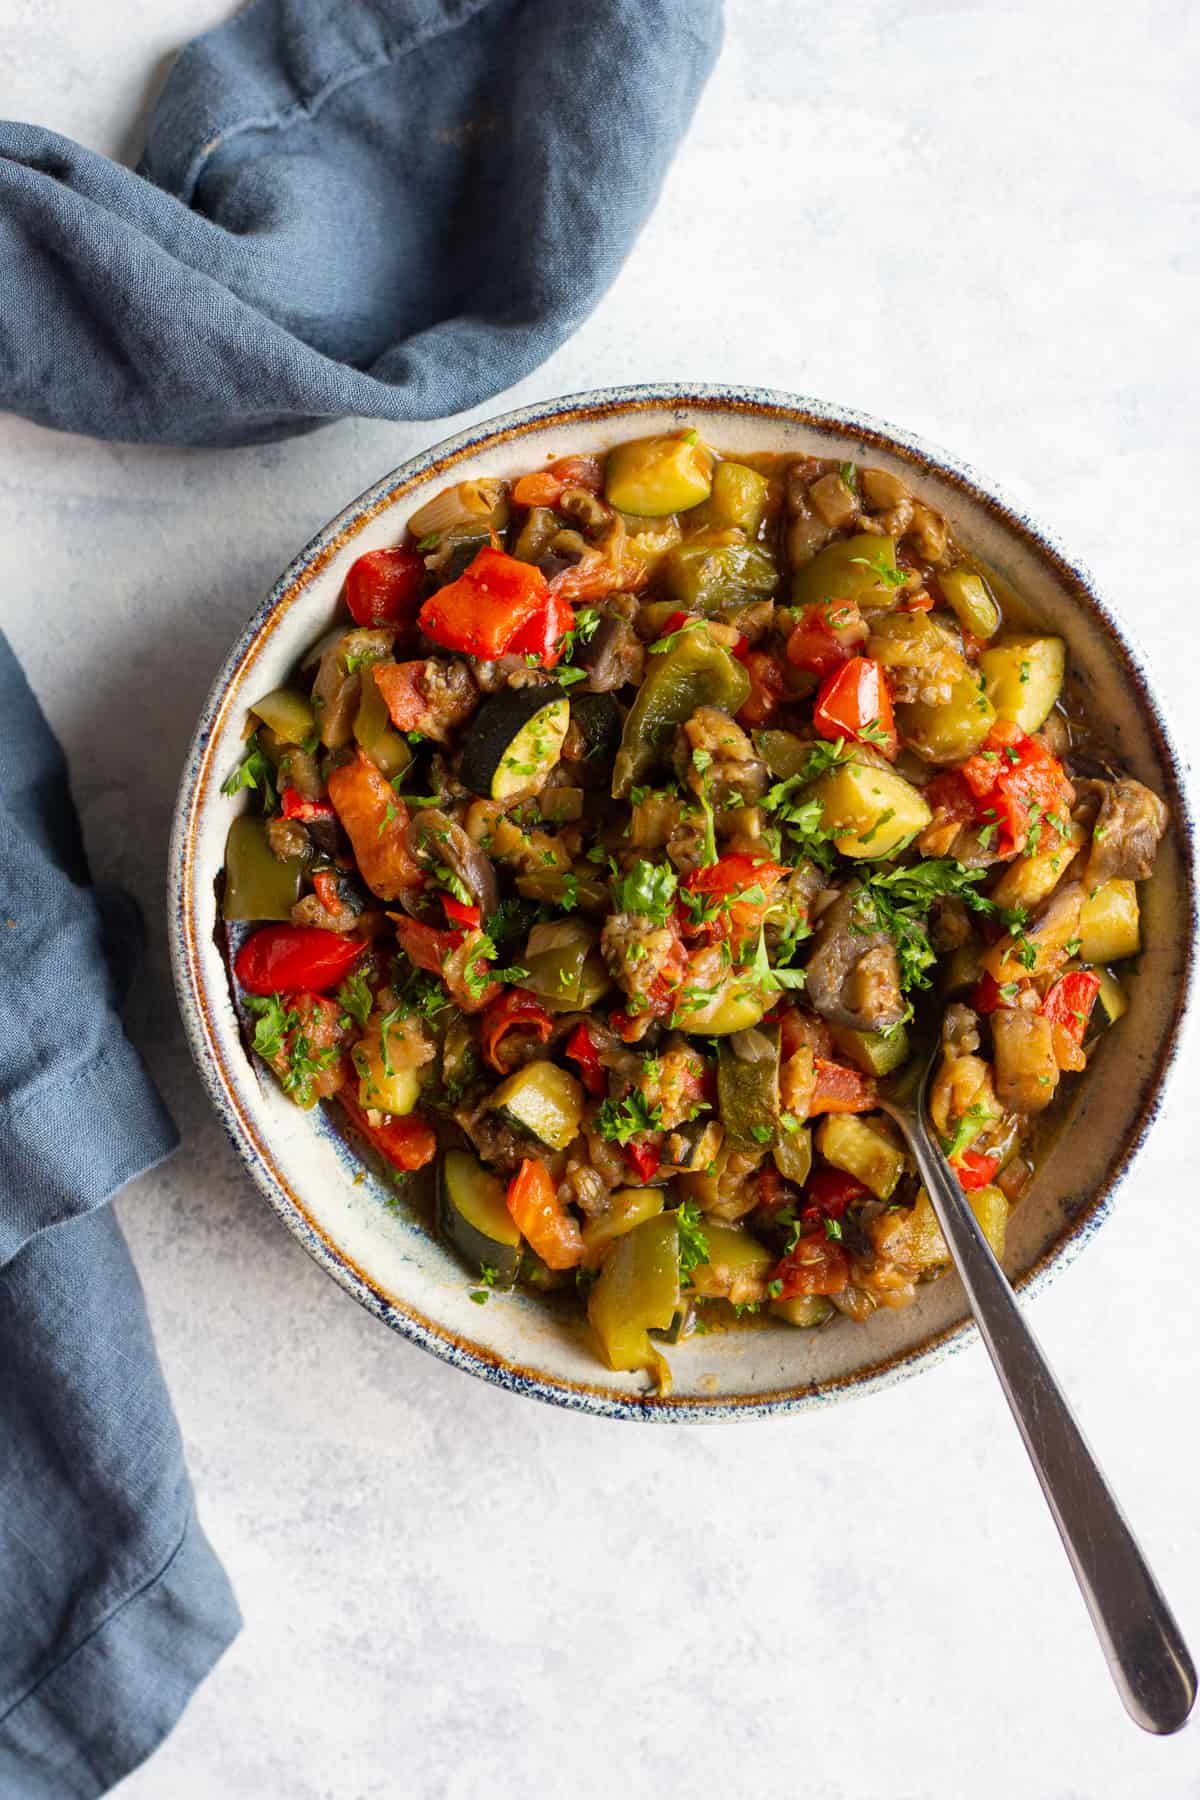 Ratatouille is a hearty and healthy French dish that's packed with flavor. This recipe is made with hearty summer vegetables that you may already have on hand.
